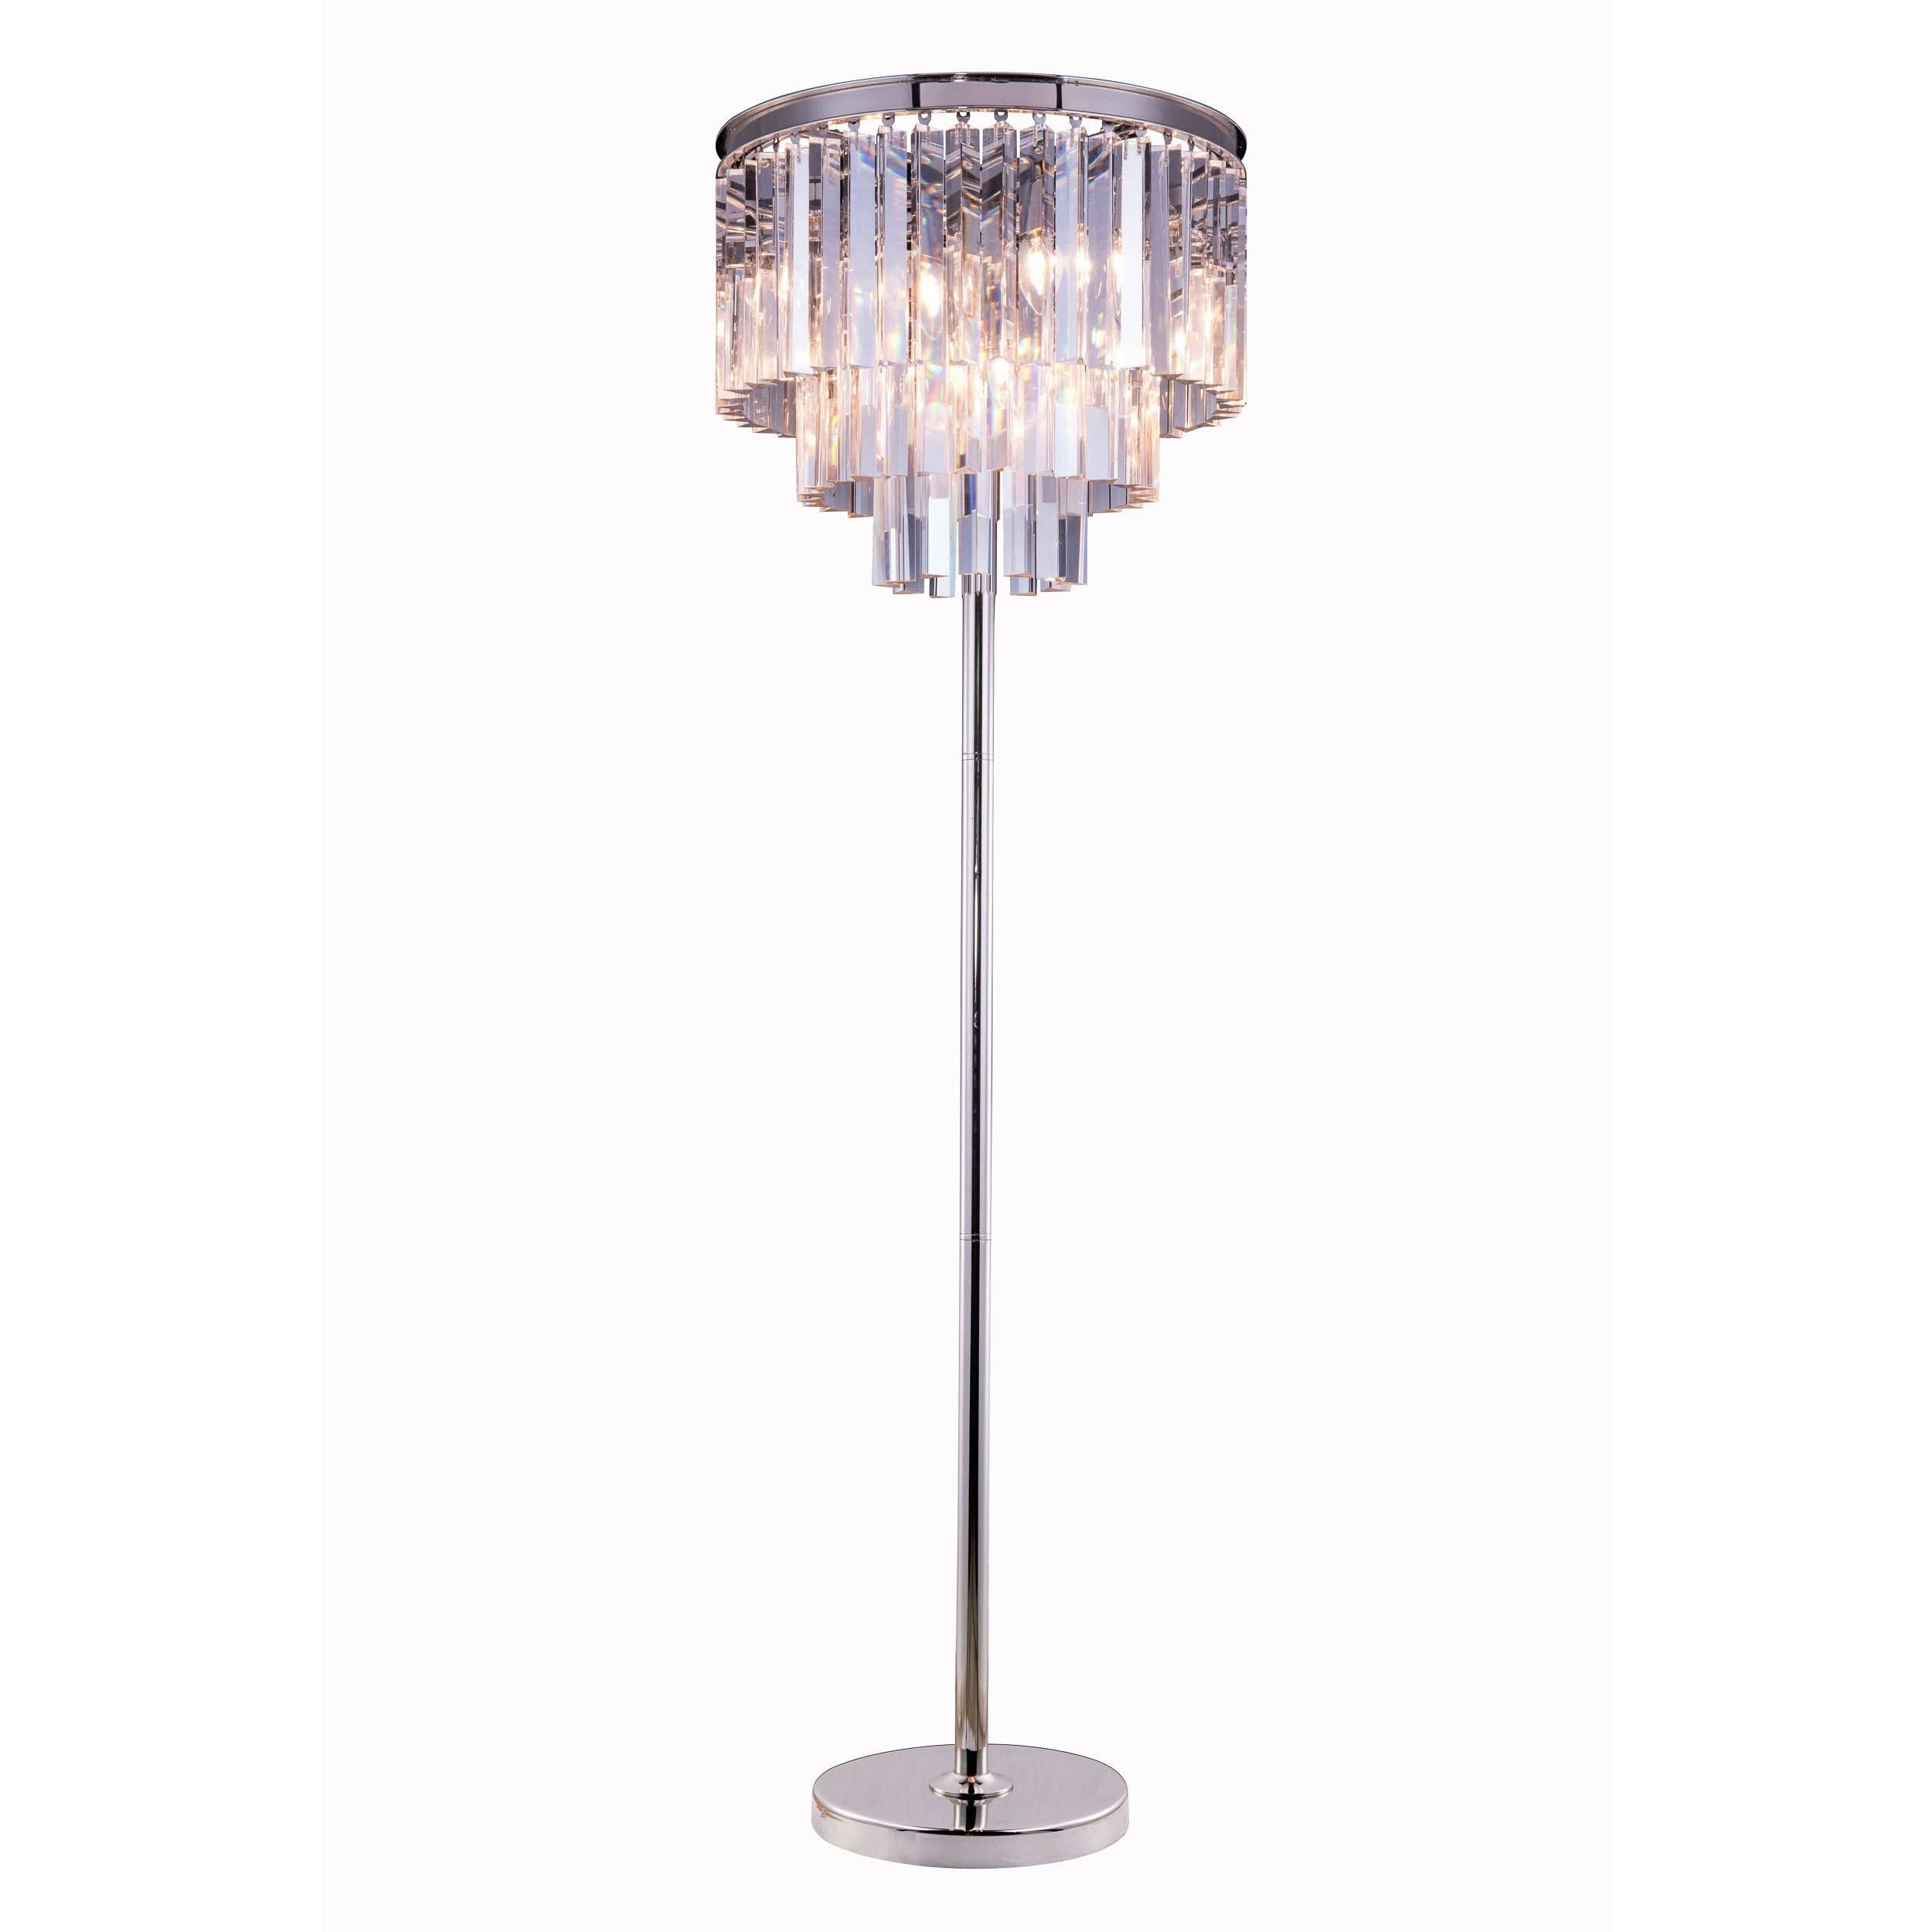 Somette Perth Collection Grand Crystal 63 Inch Floor Lamp in size 2500 X 2500